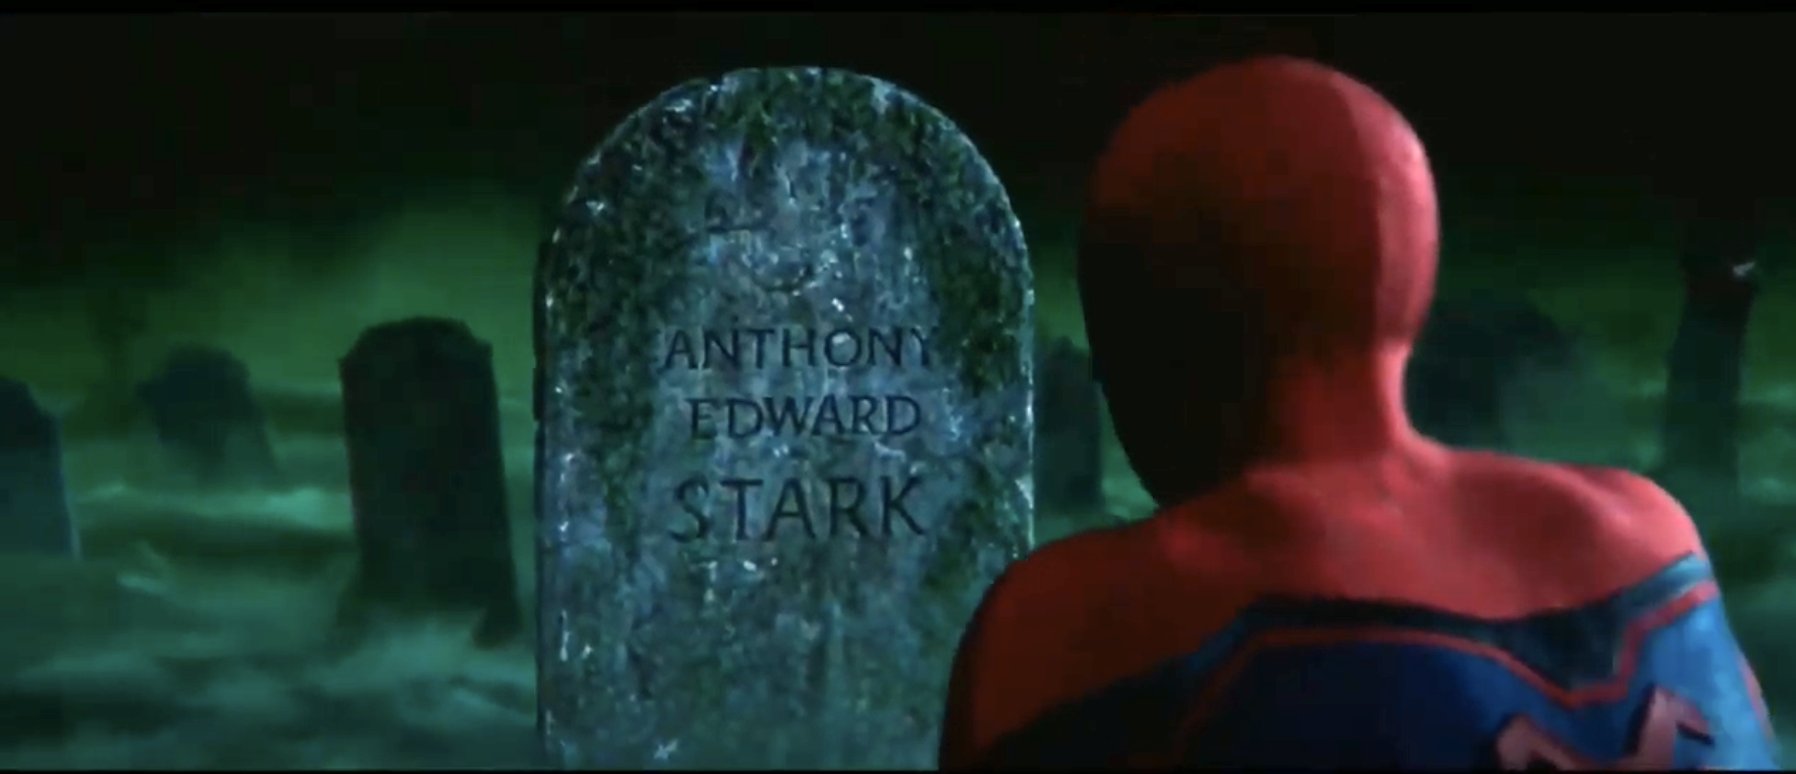 Peter Parker looking at Tony Stark&#x27;s grave in an illusion scene in Far From Home.